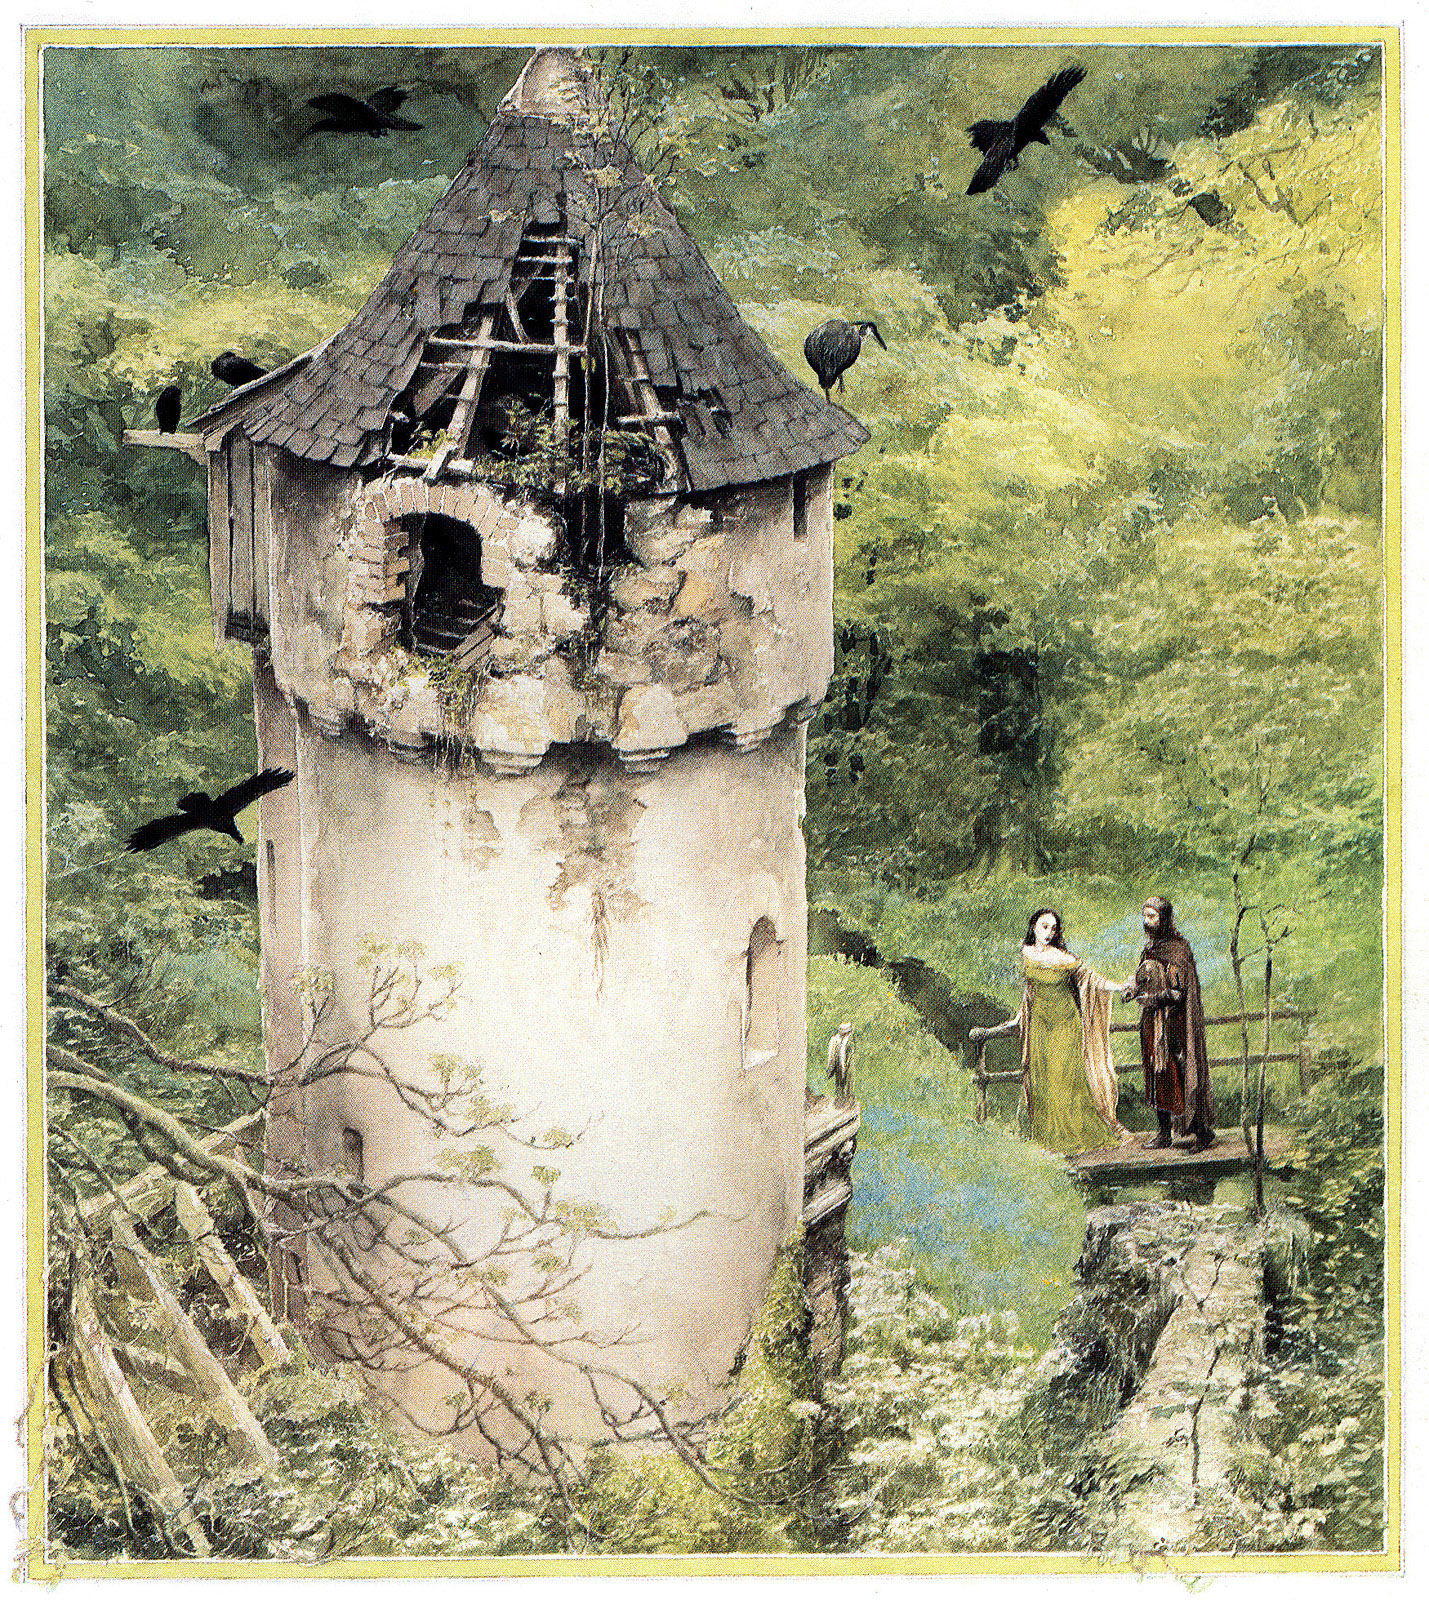 alan_lee_castles_the%20tower%20of%20annowre.jpg